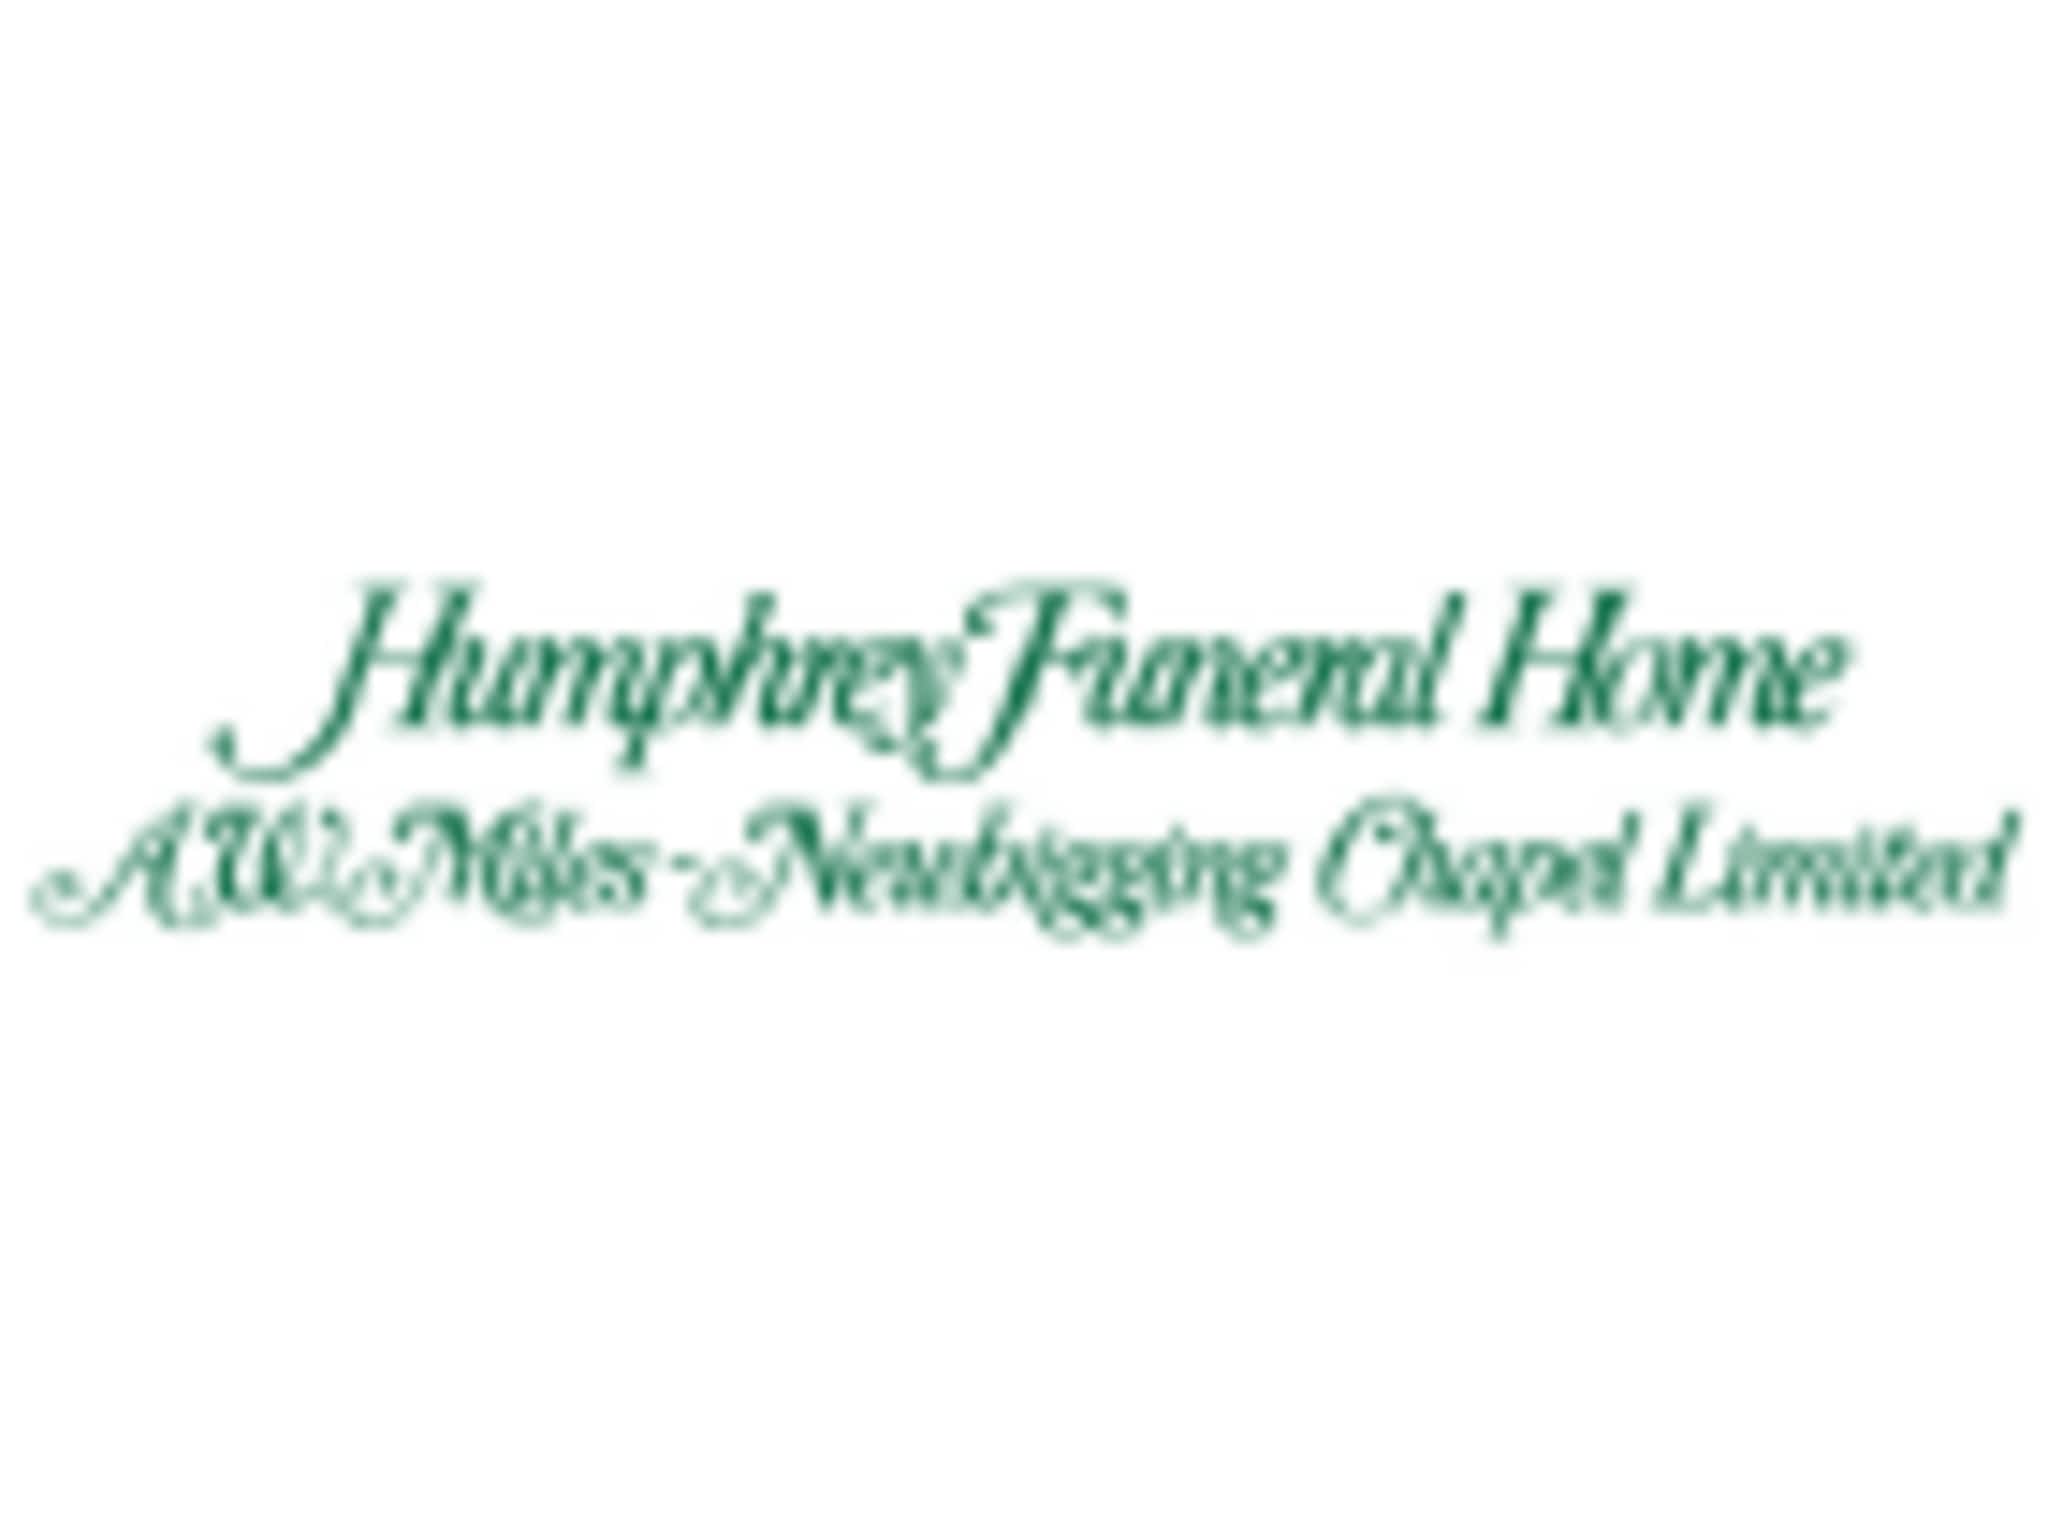 photo Humphrey Funeral Home A W Miles Newbigging Chapel Limited